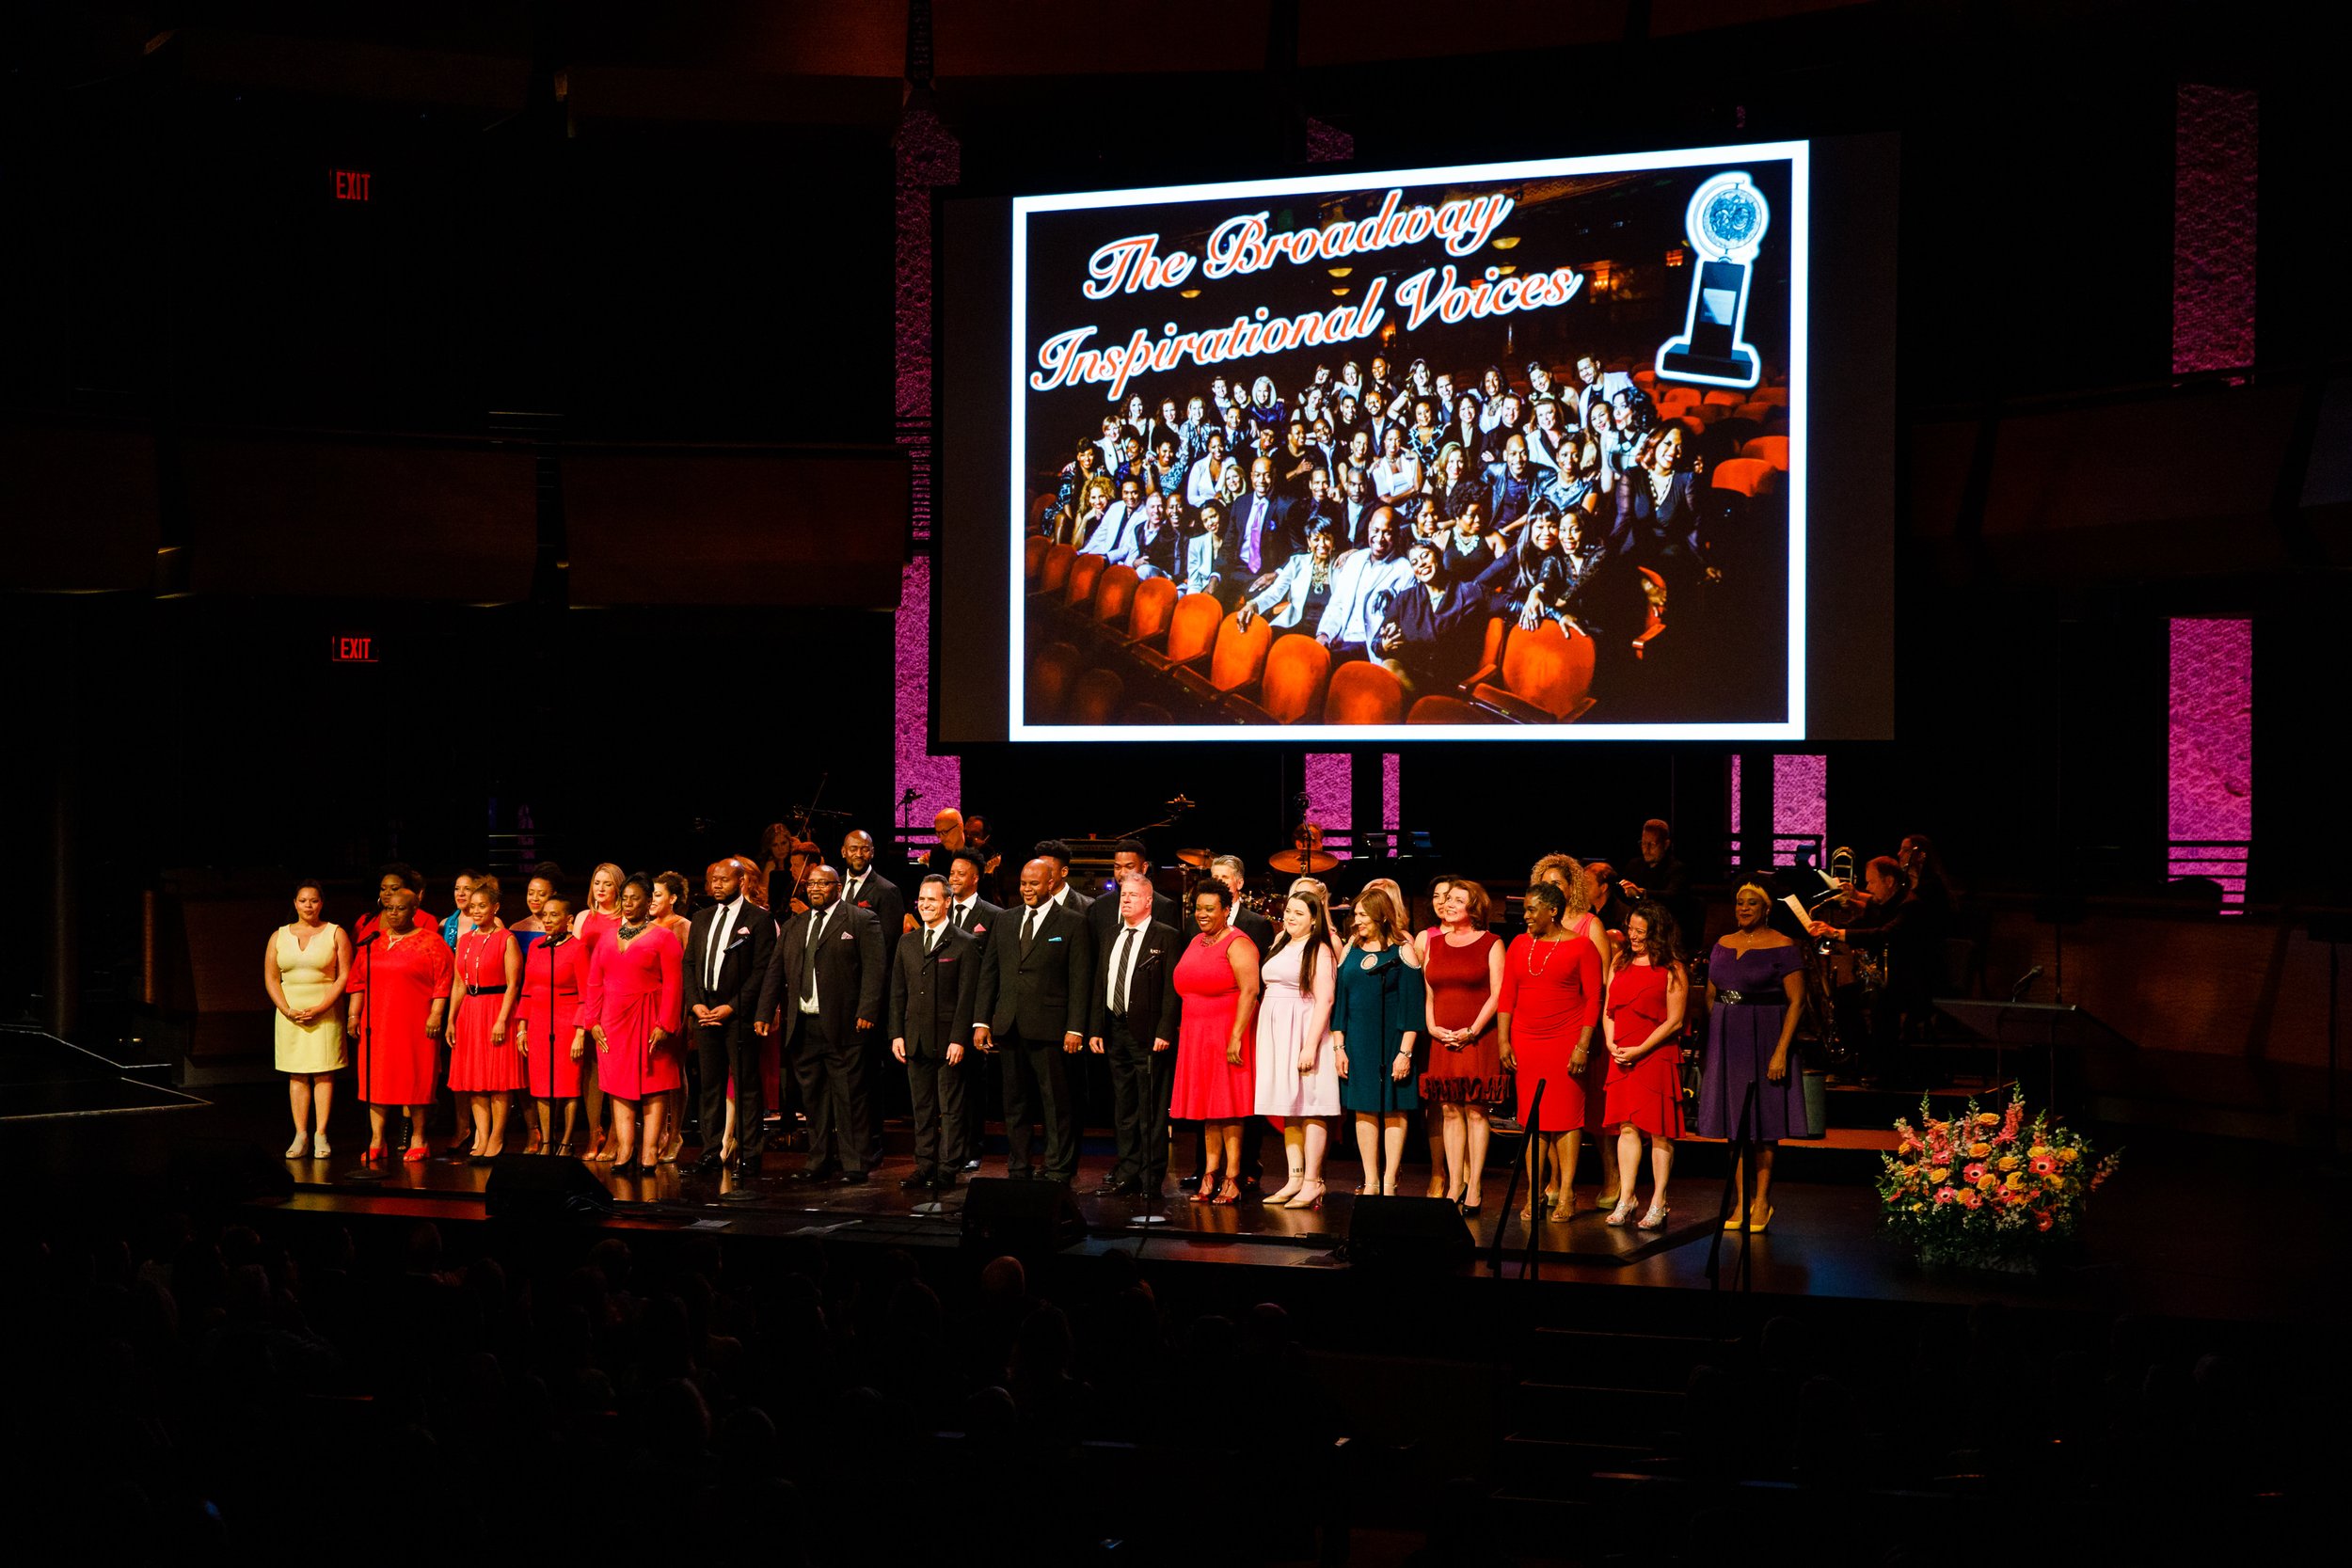 Broadway Inspirational Voices, Night of Broadway Stars Covenant House New York